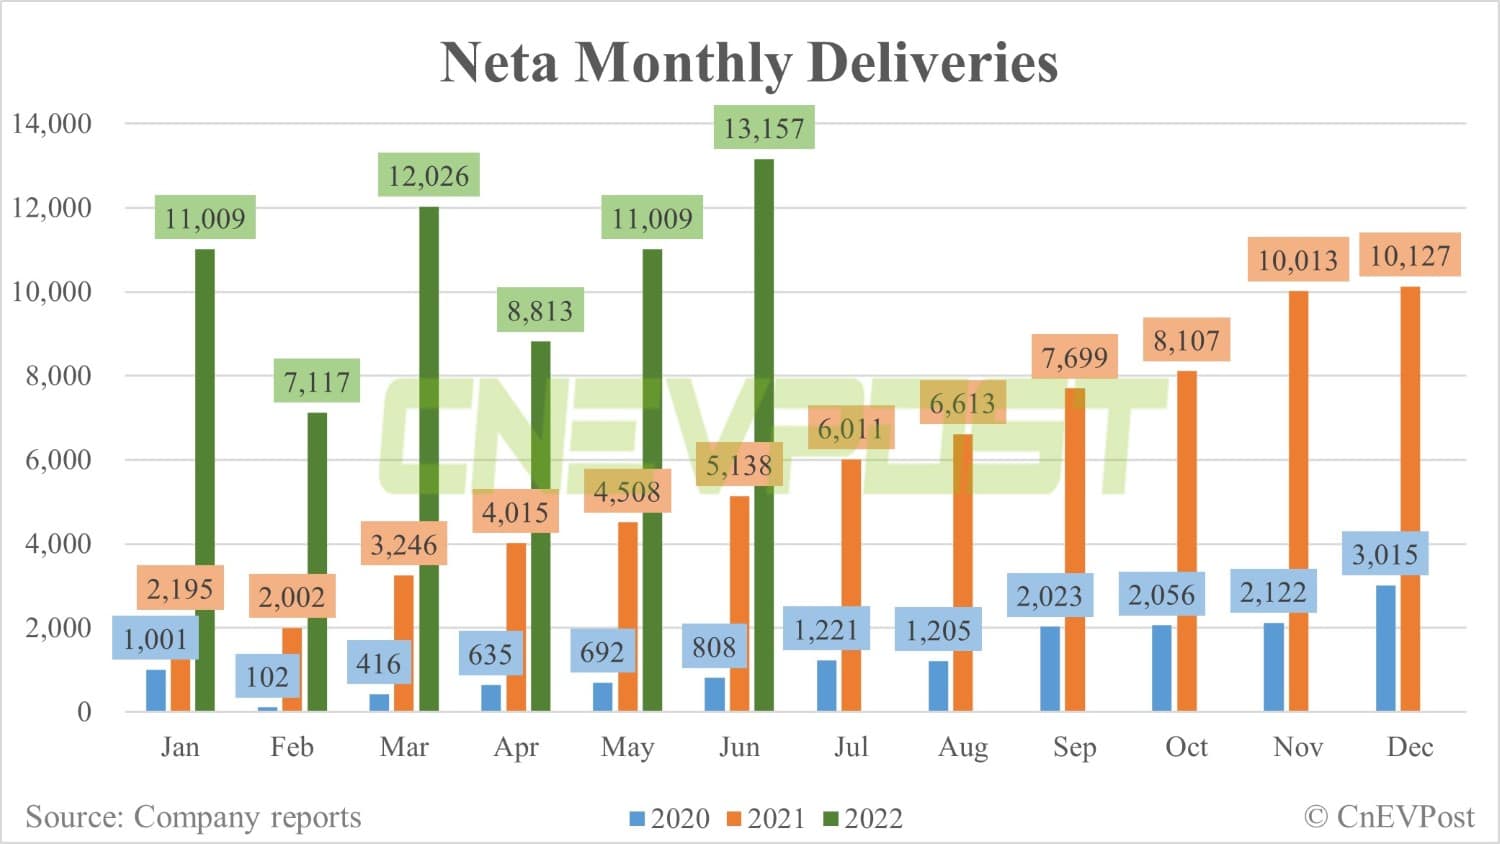 Neta delivers 13,157 vehicles in June, up 19.5% from May-CnEVPost